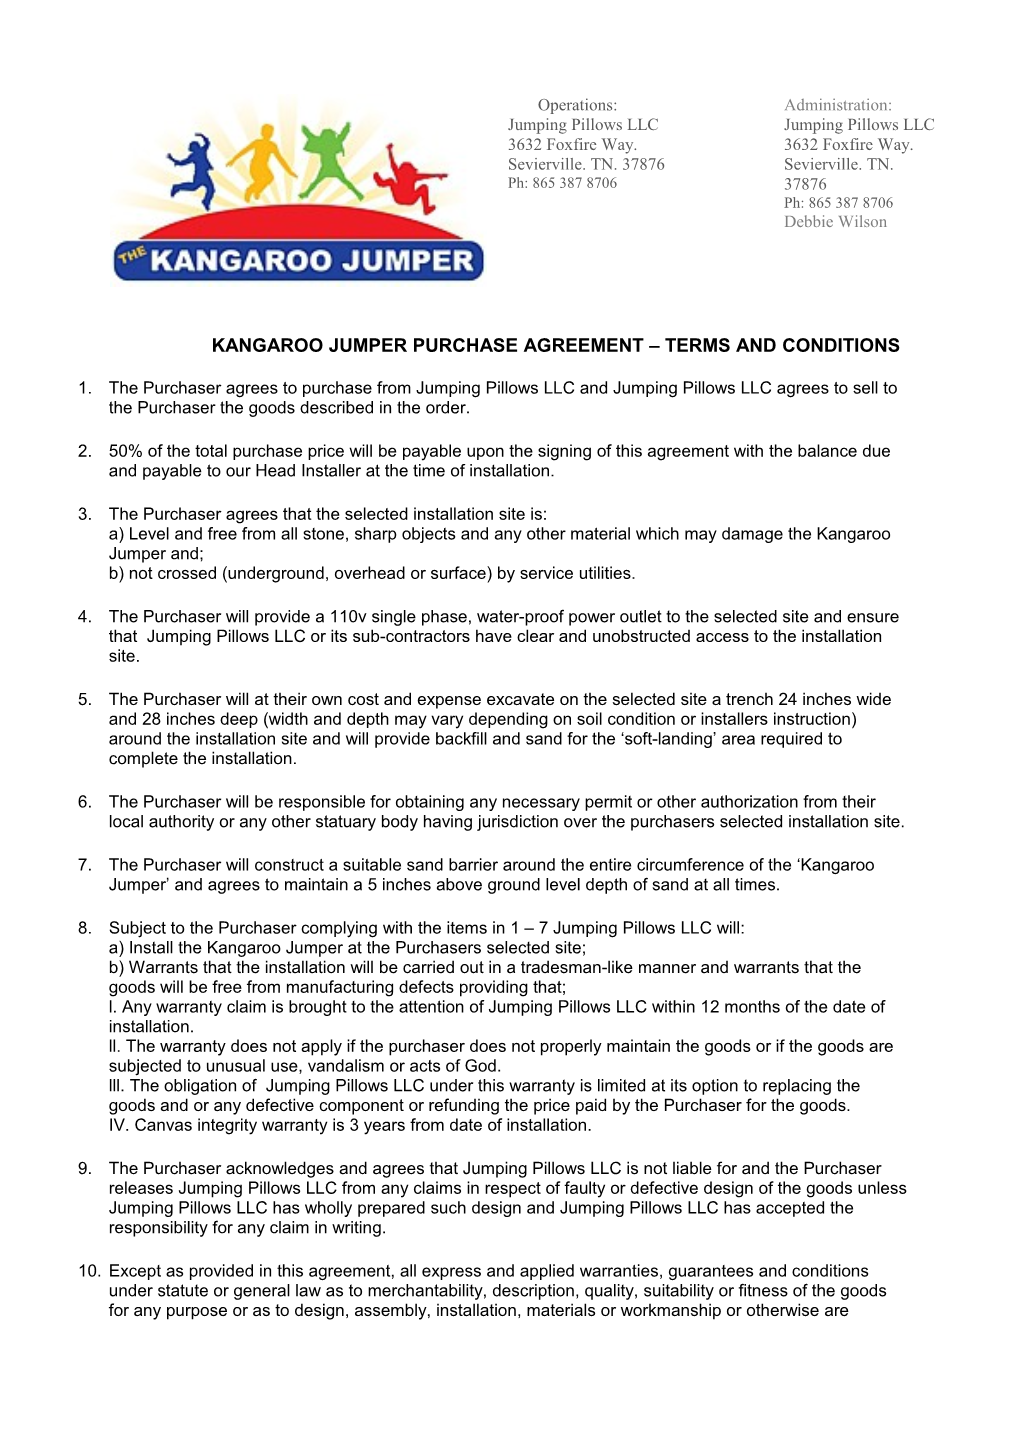 Kangaroo Jumper Purchase Agreement Terms and Conditions